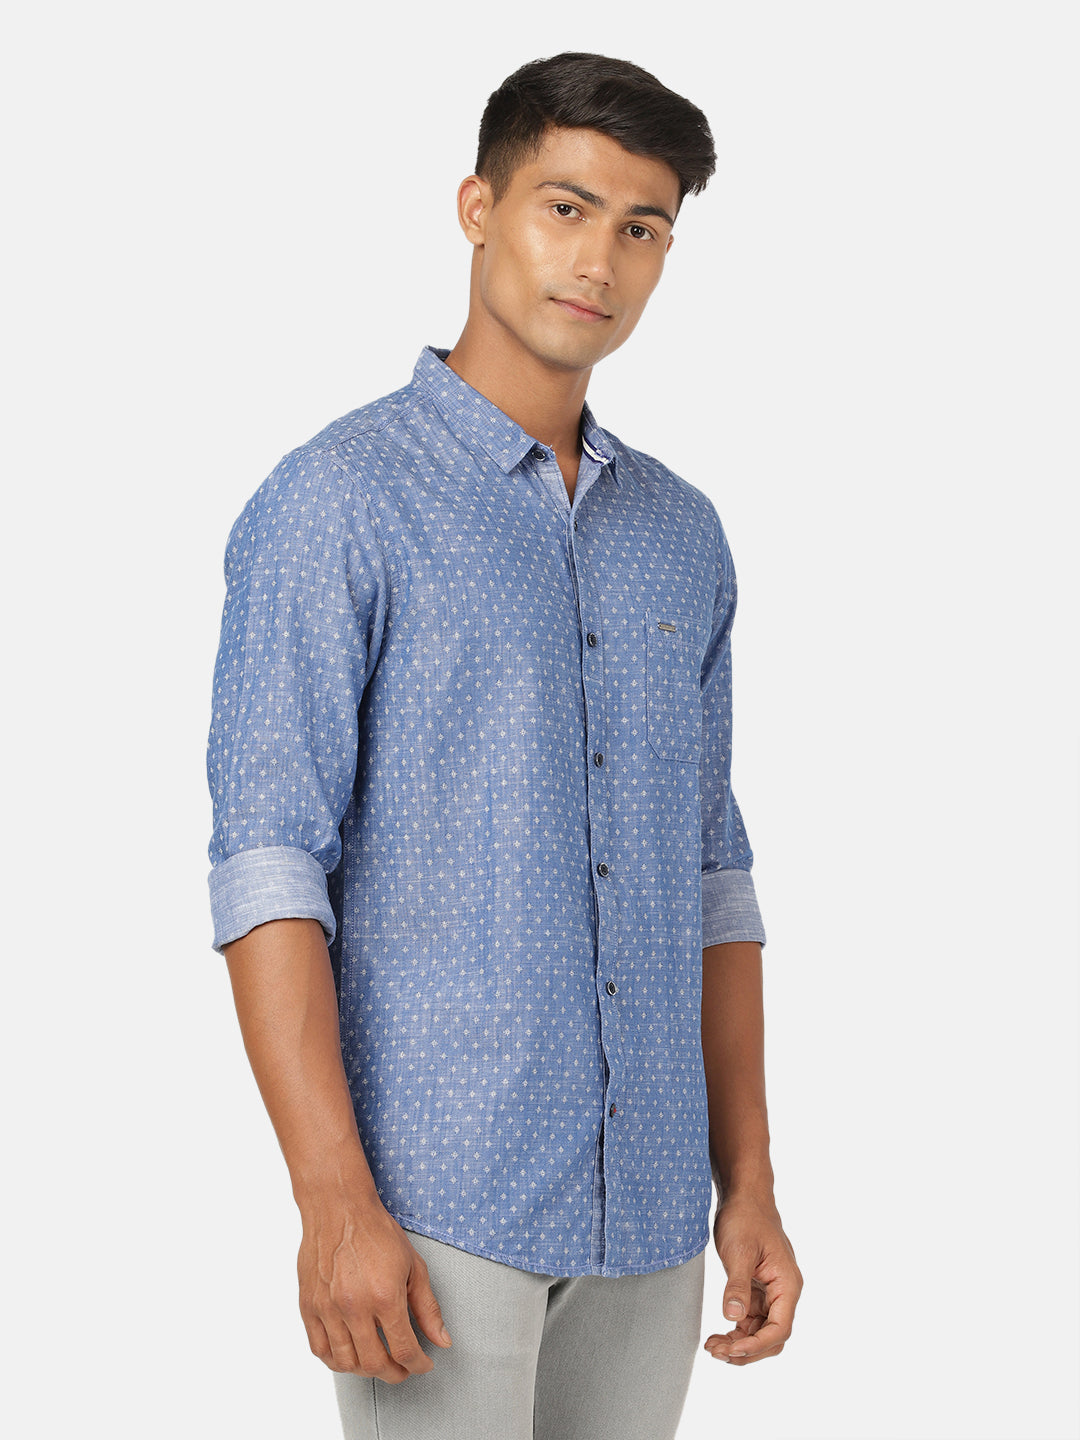 Crocodile Men's Casual Full Sleeve Slim Fit Printed Blue with Collar Shirt